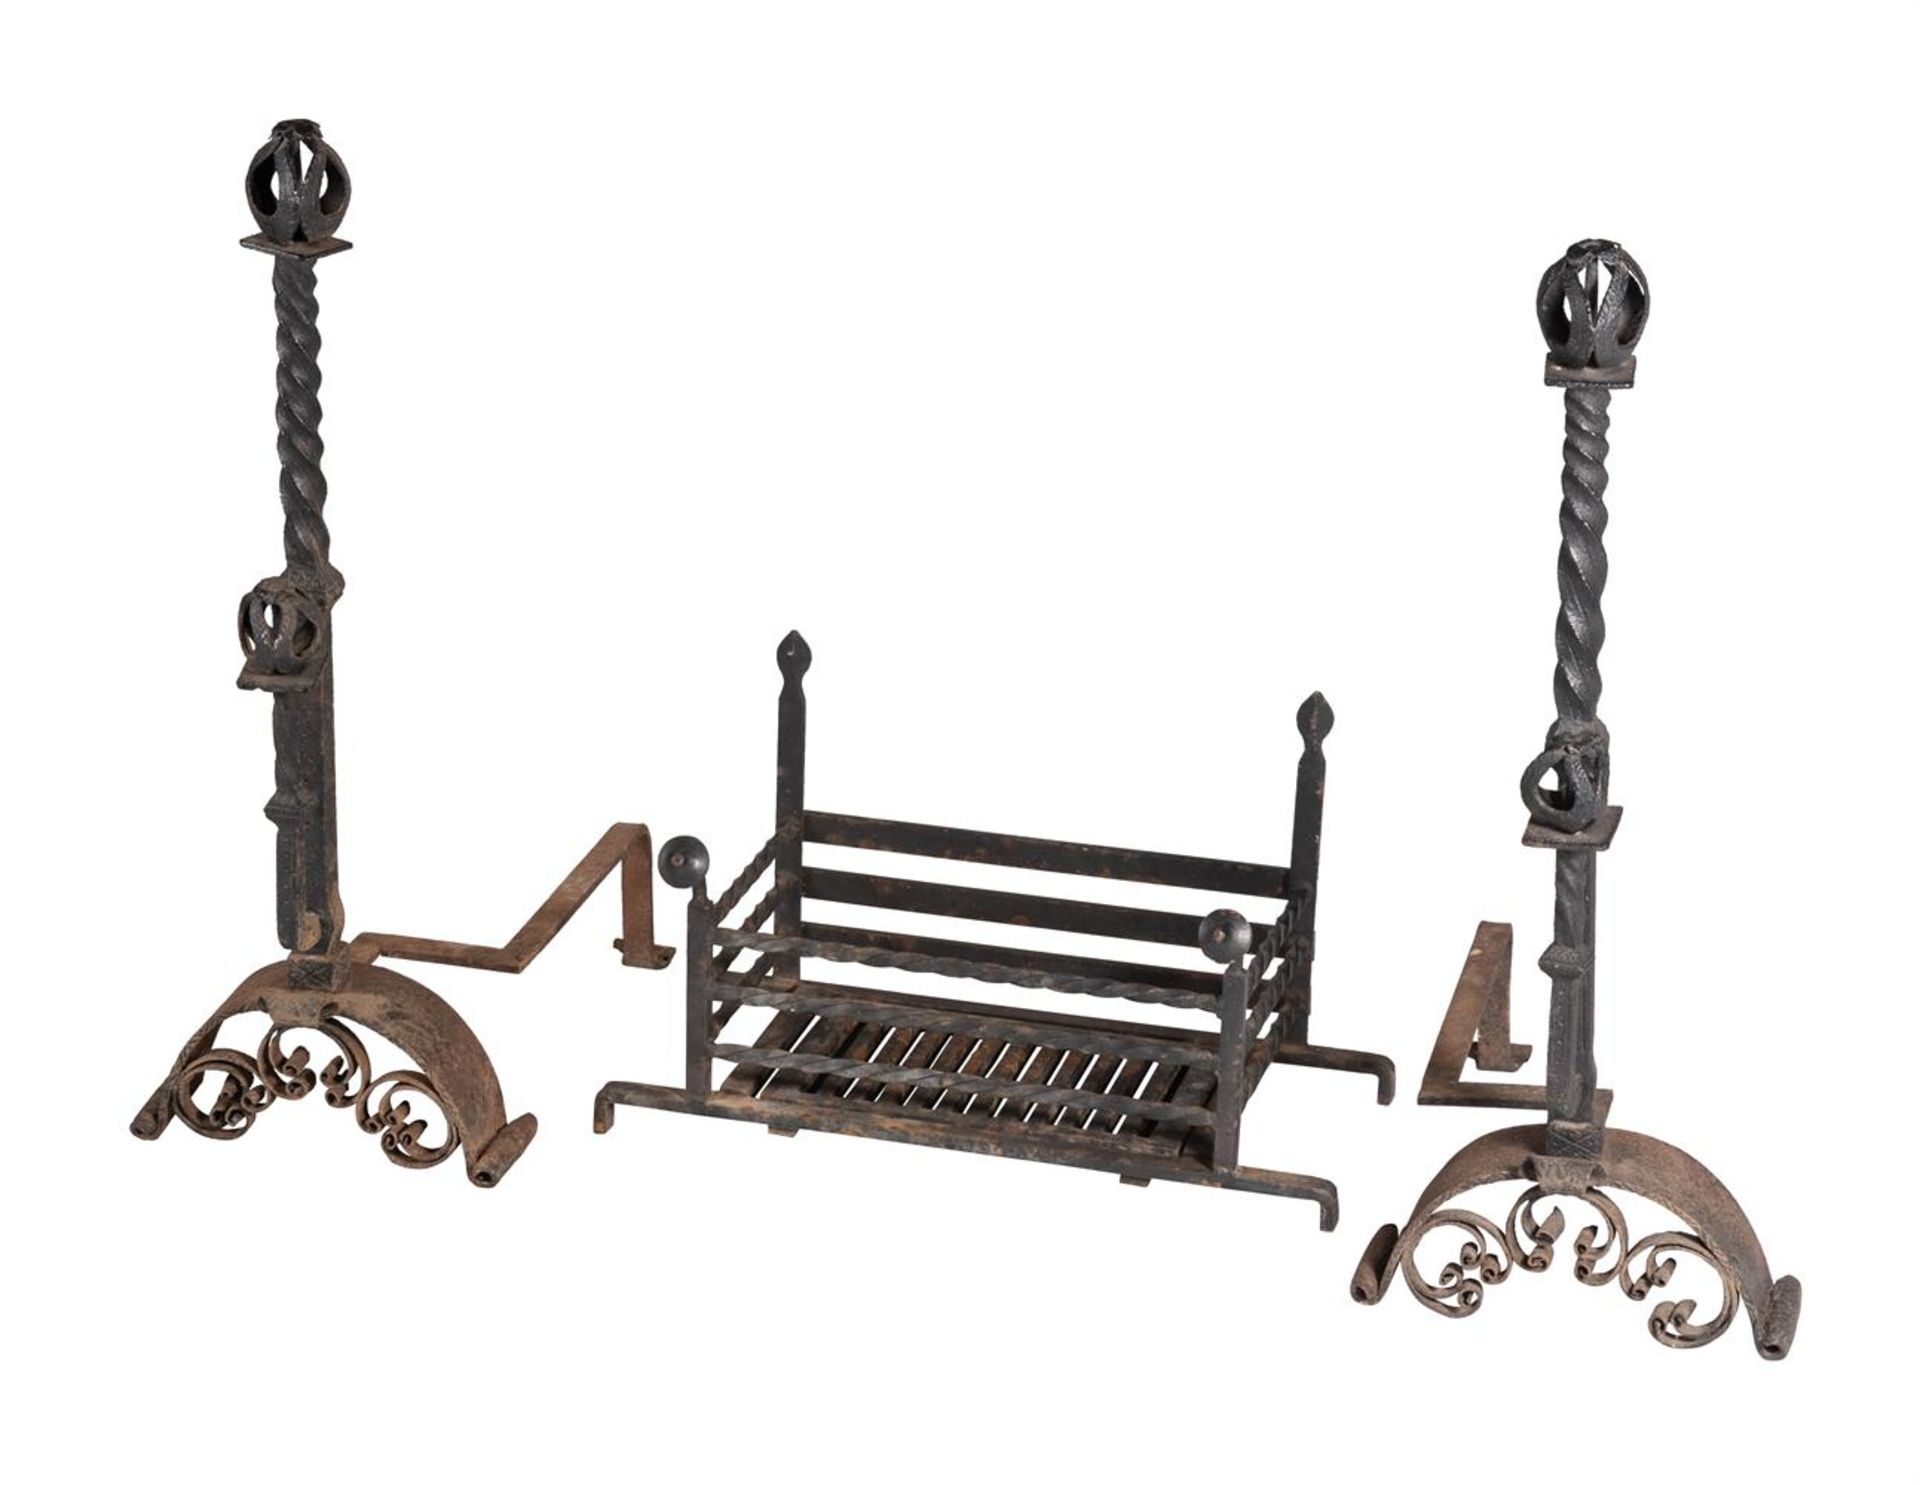 A PAIR OF WROUGHT IRON ANDIRONS IN ARTS AND CRAFTS STYLE - Image 2 of 2